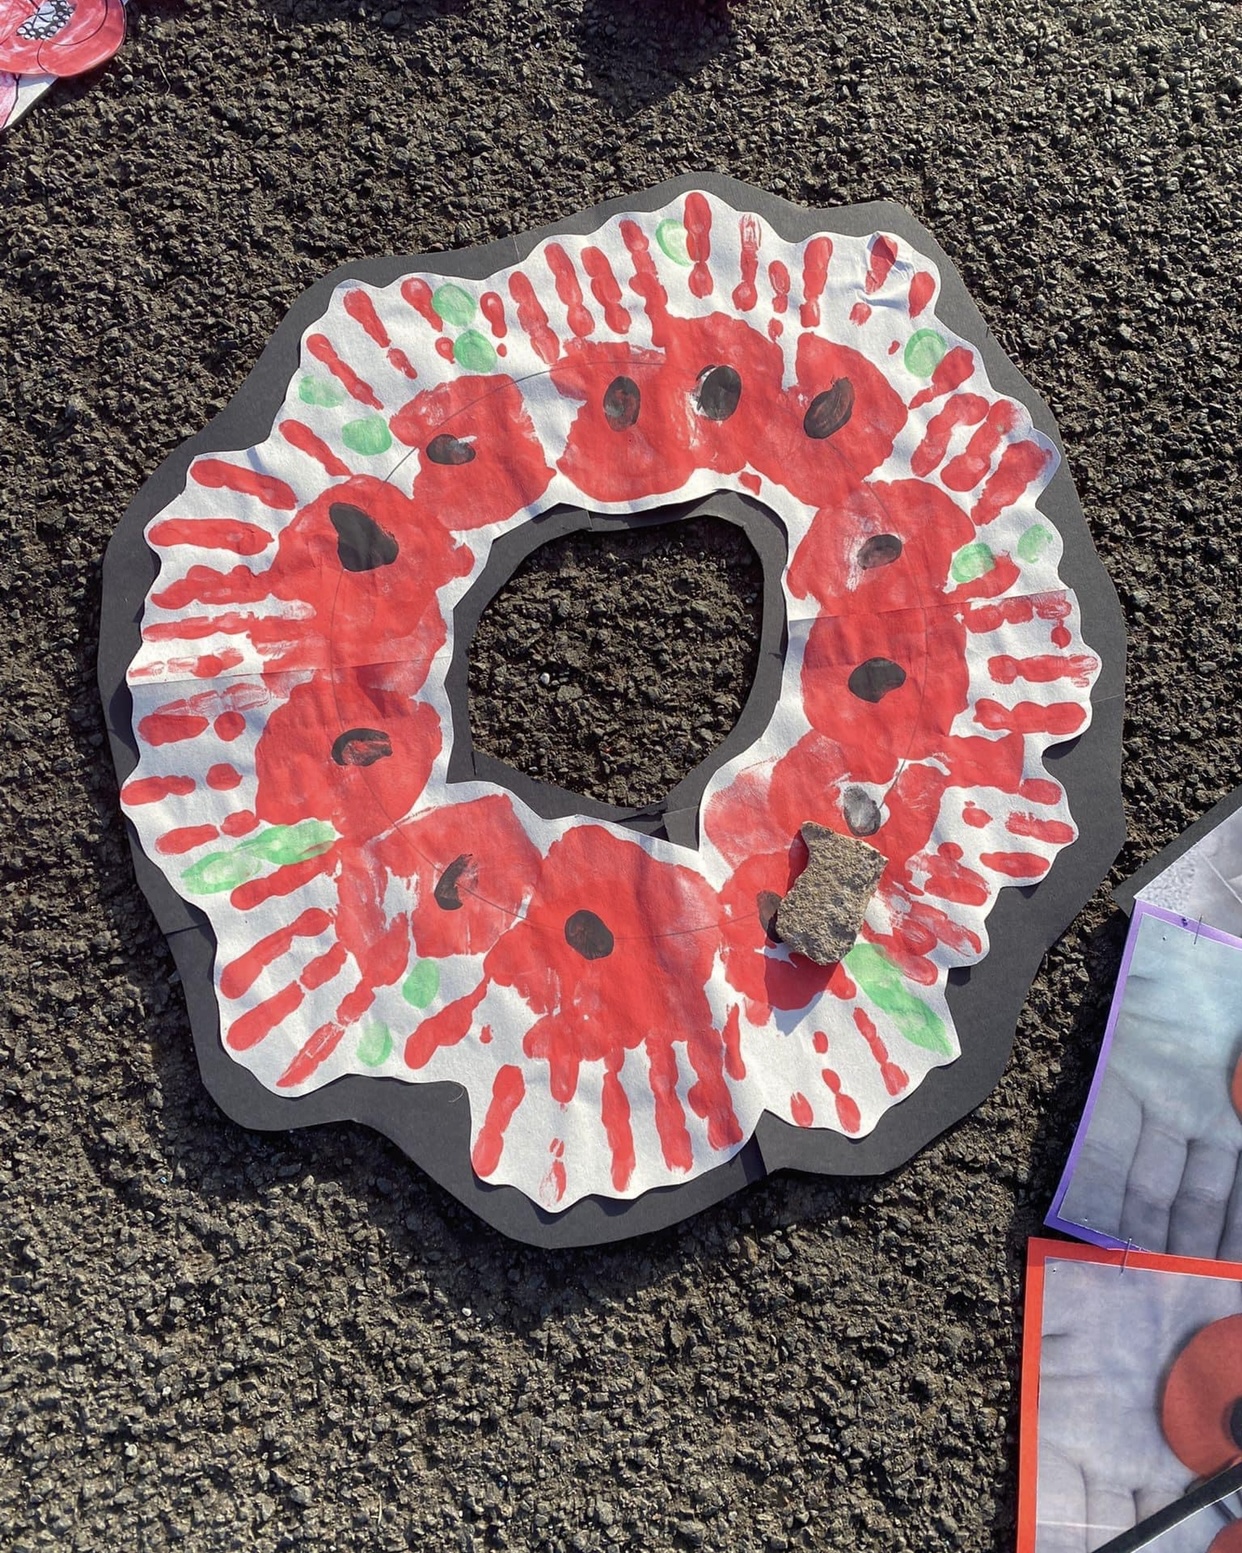 A wreath made by the children